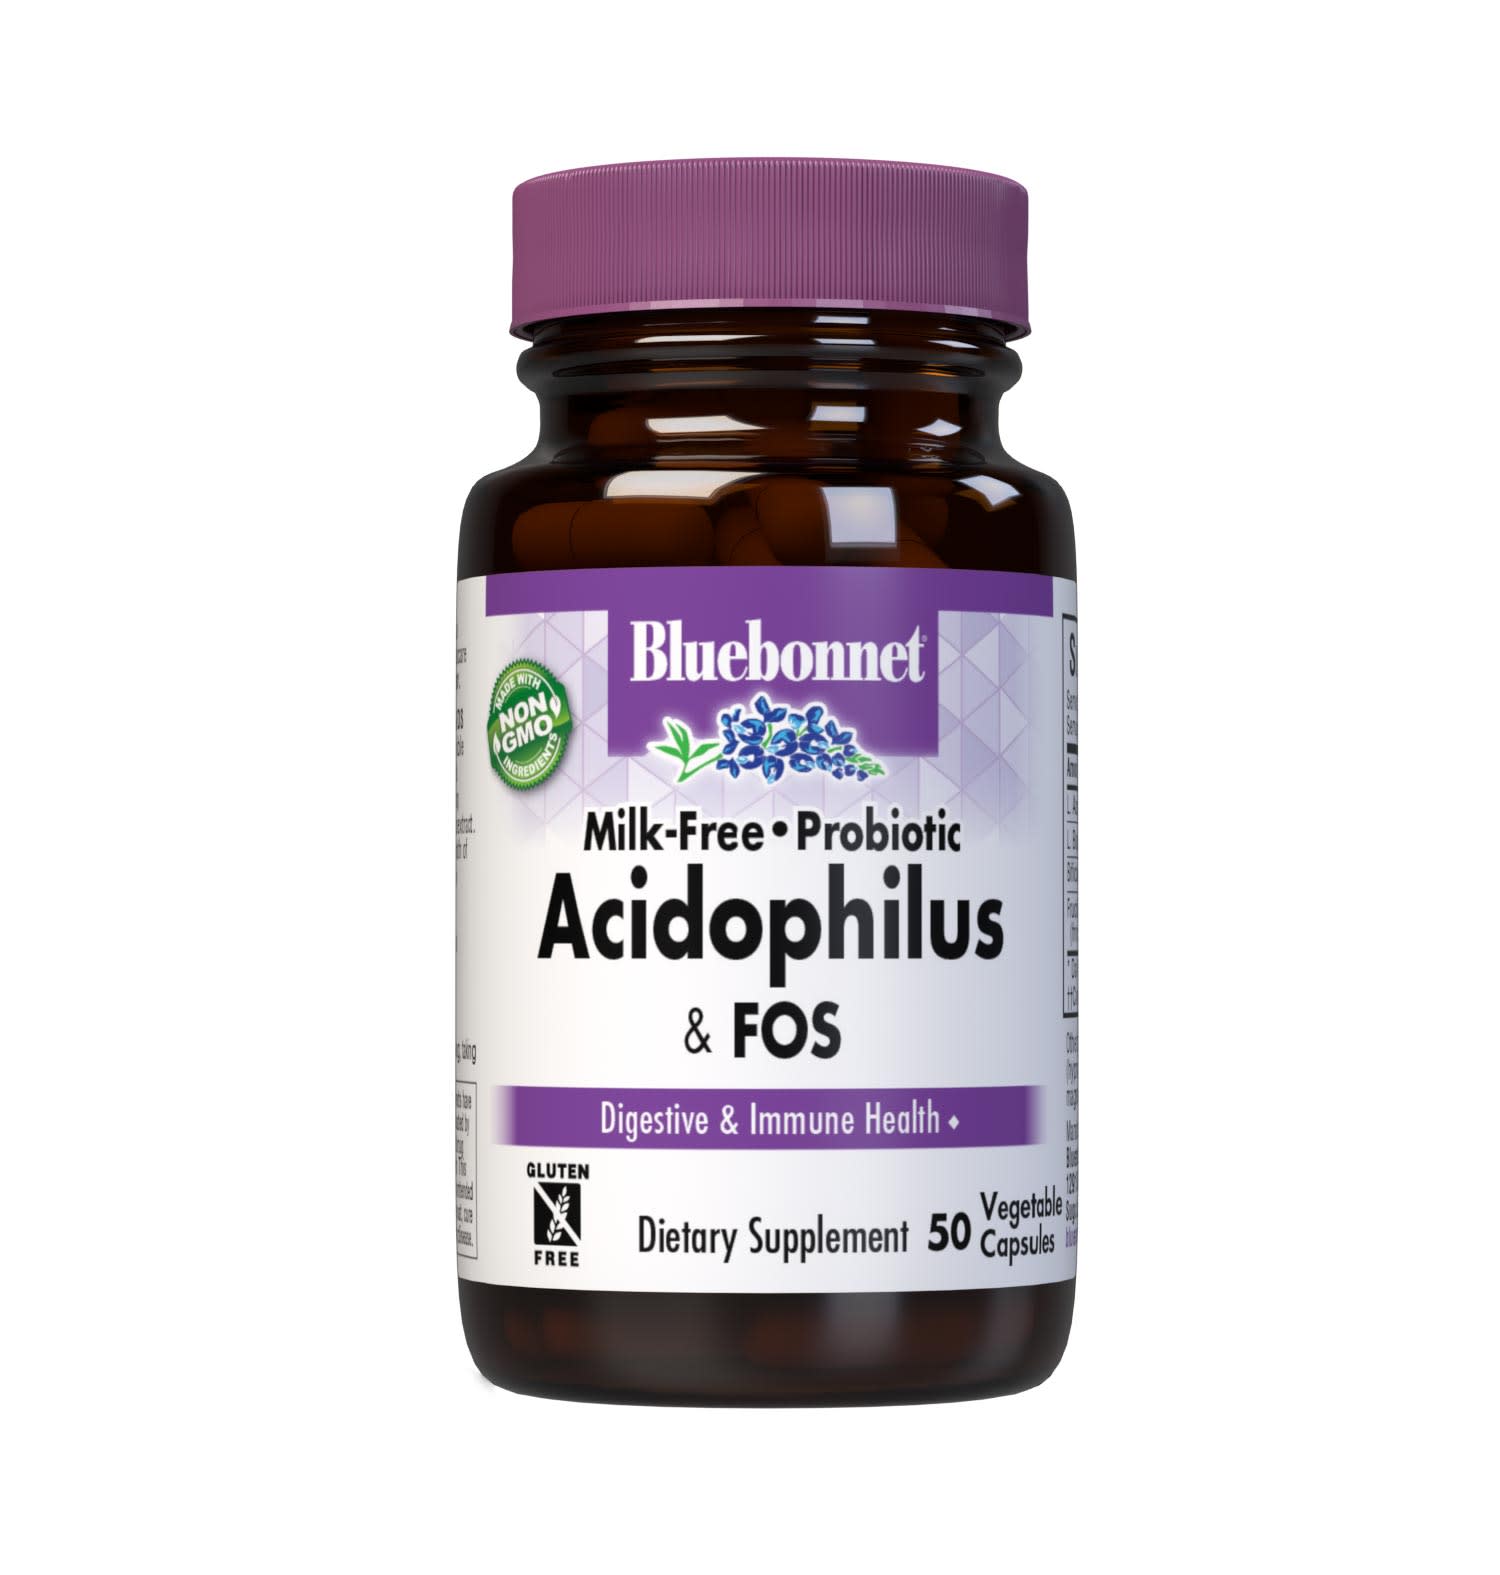 Bluebonnet’s Milk-Free Probiotic Acidophilus & FOS 50 Vegetable Capsules are formulated with over three billion viable cultures from lactobacillus acidophilus, lactobacillus bulgaricus, bifidobacterium bifidum strains along with FOS (fructooligosaccharides) from chicory root extract. This probiotic formula is designed to assist the growth of friendly bacteria in the gut to help support digestive and immune health. #size_50 count